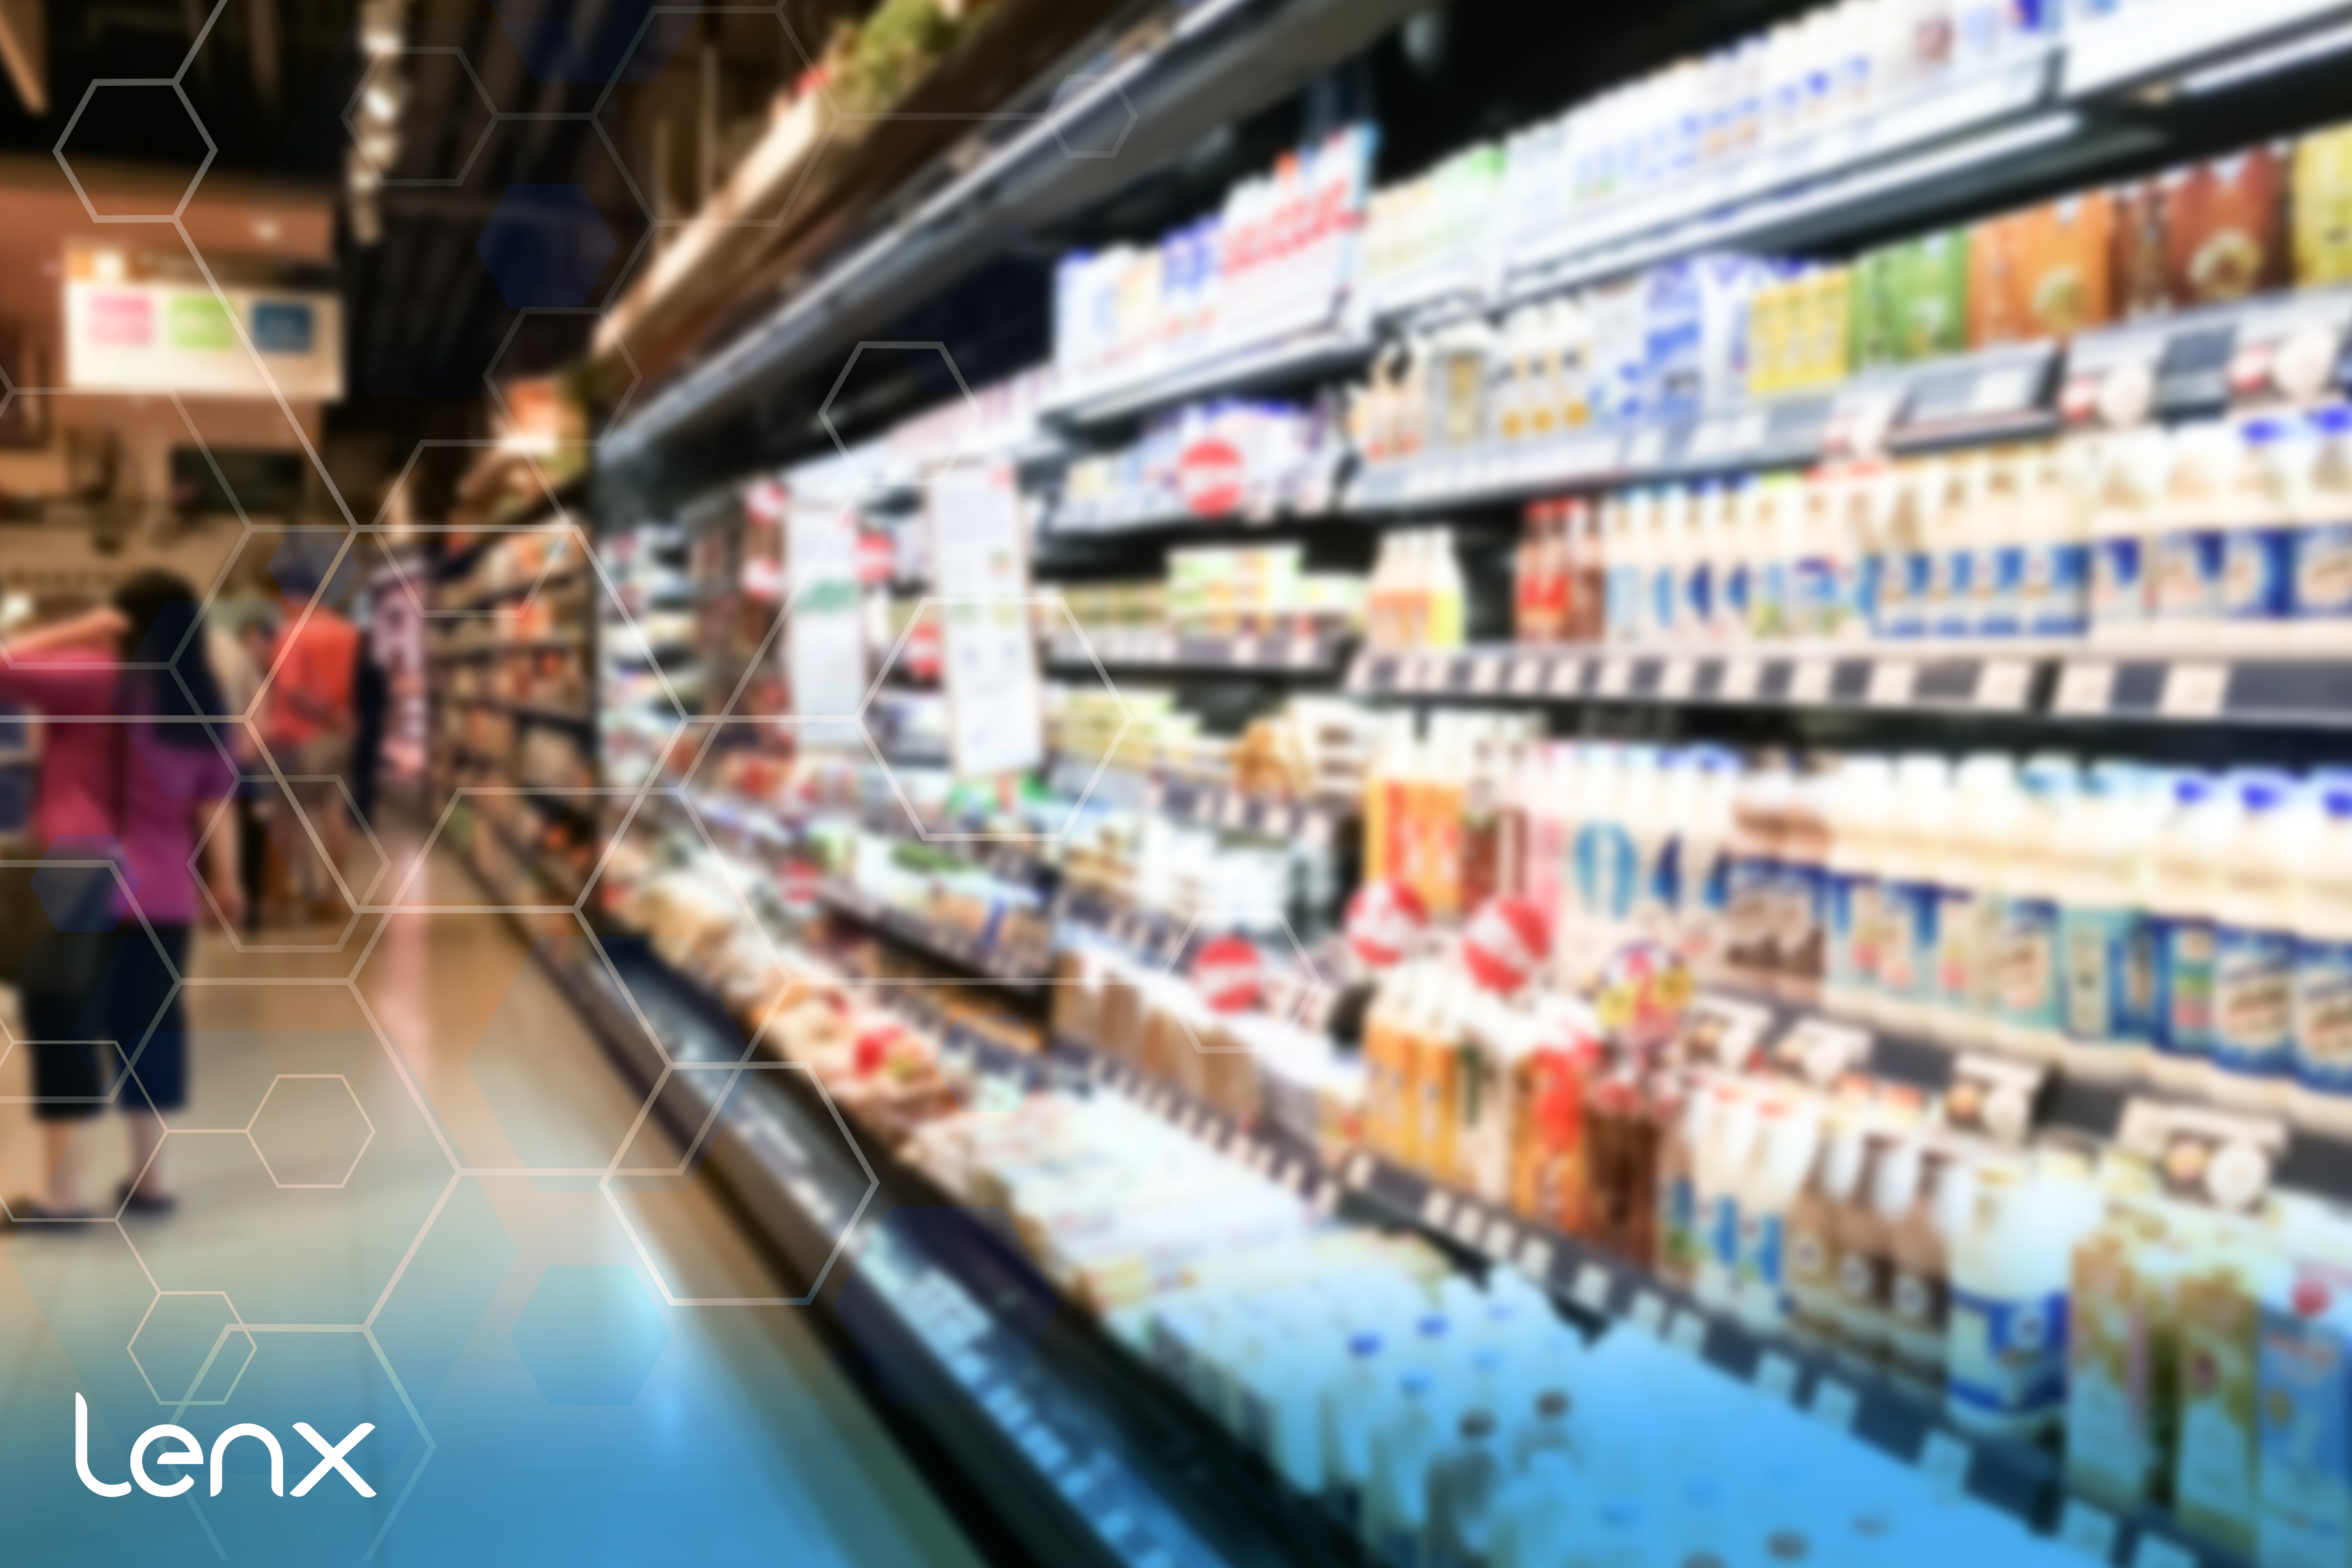 How Large Retailers And Grocery Stores Can Prevent Tragedy With AI Security, Active Shooter Detection Systems